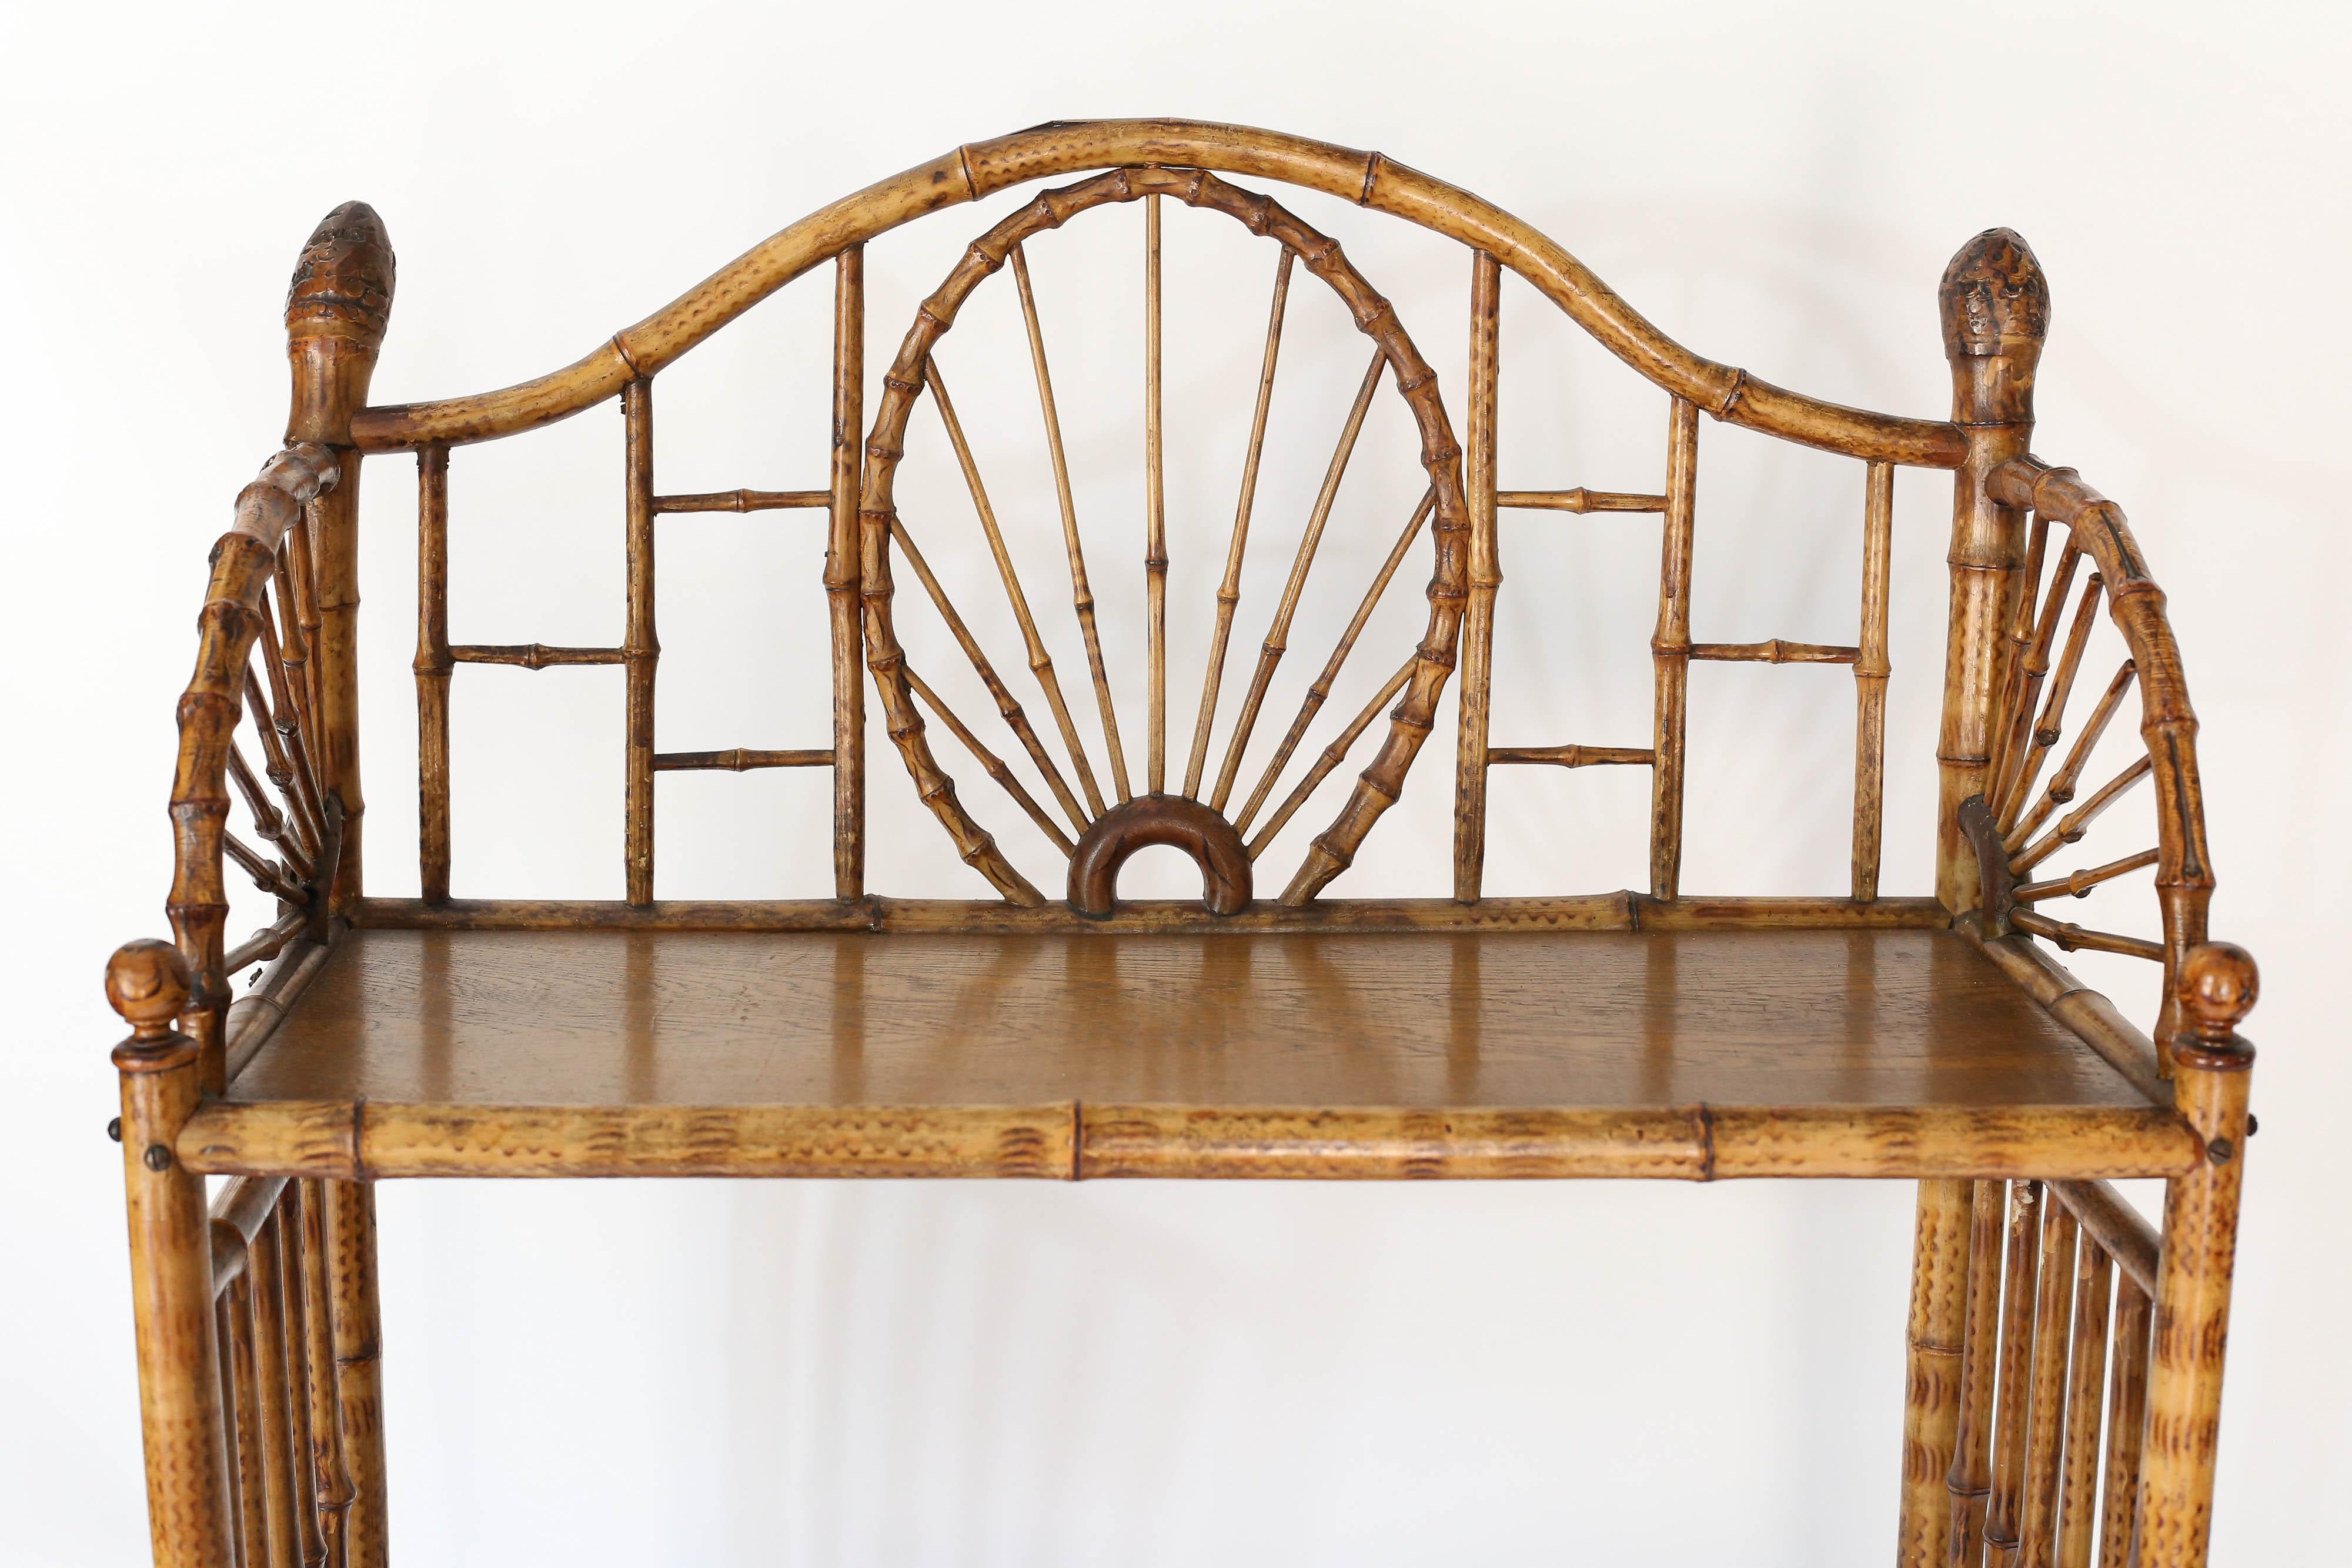 Found in England, a fabulous midcentury three tier shelf with spoke wheel detail. The work on this piece is exquisite in detail. A must have piece.